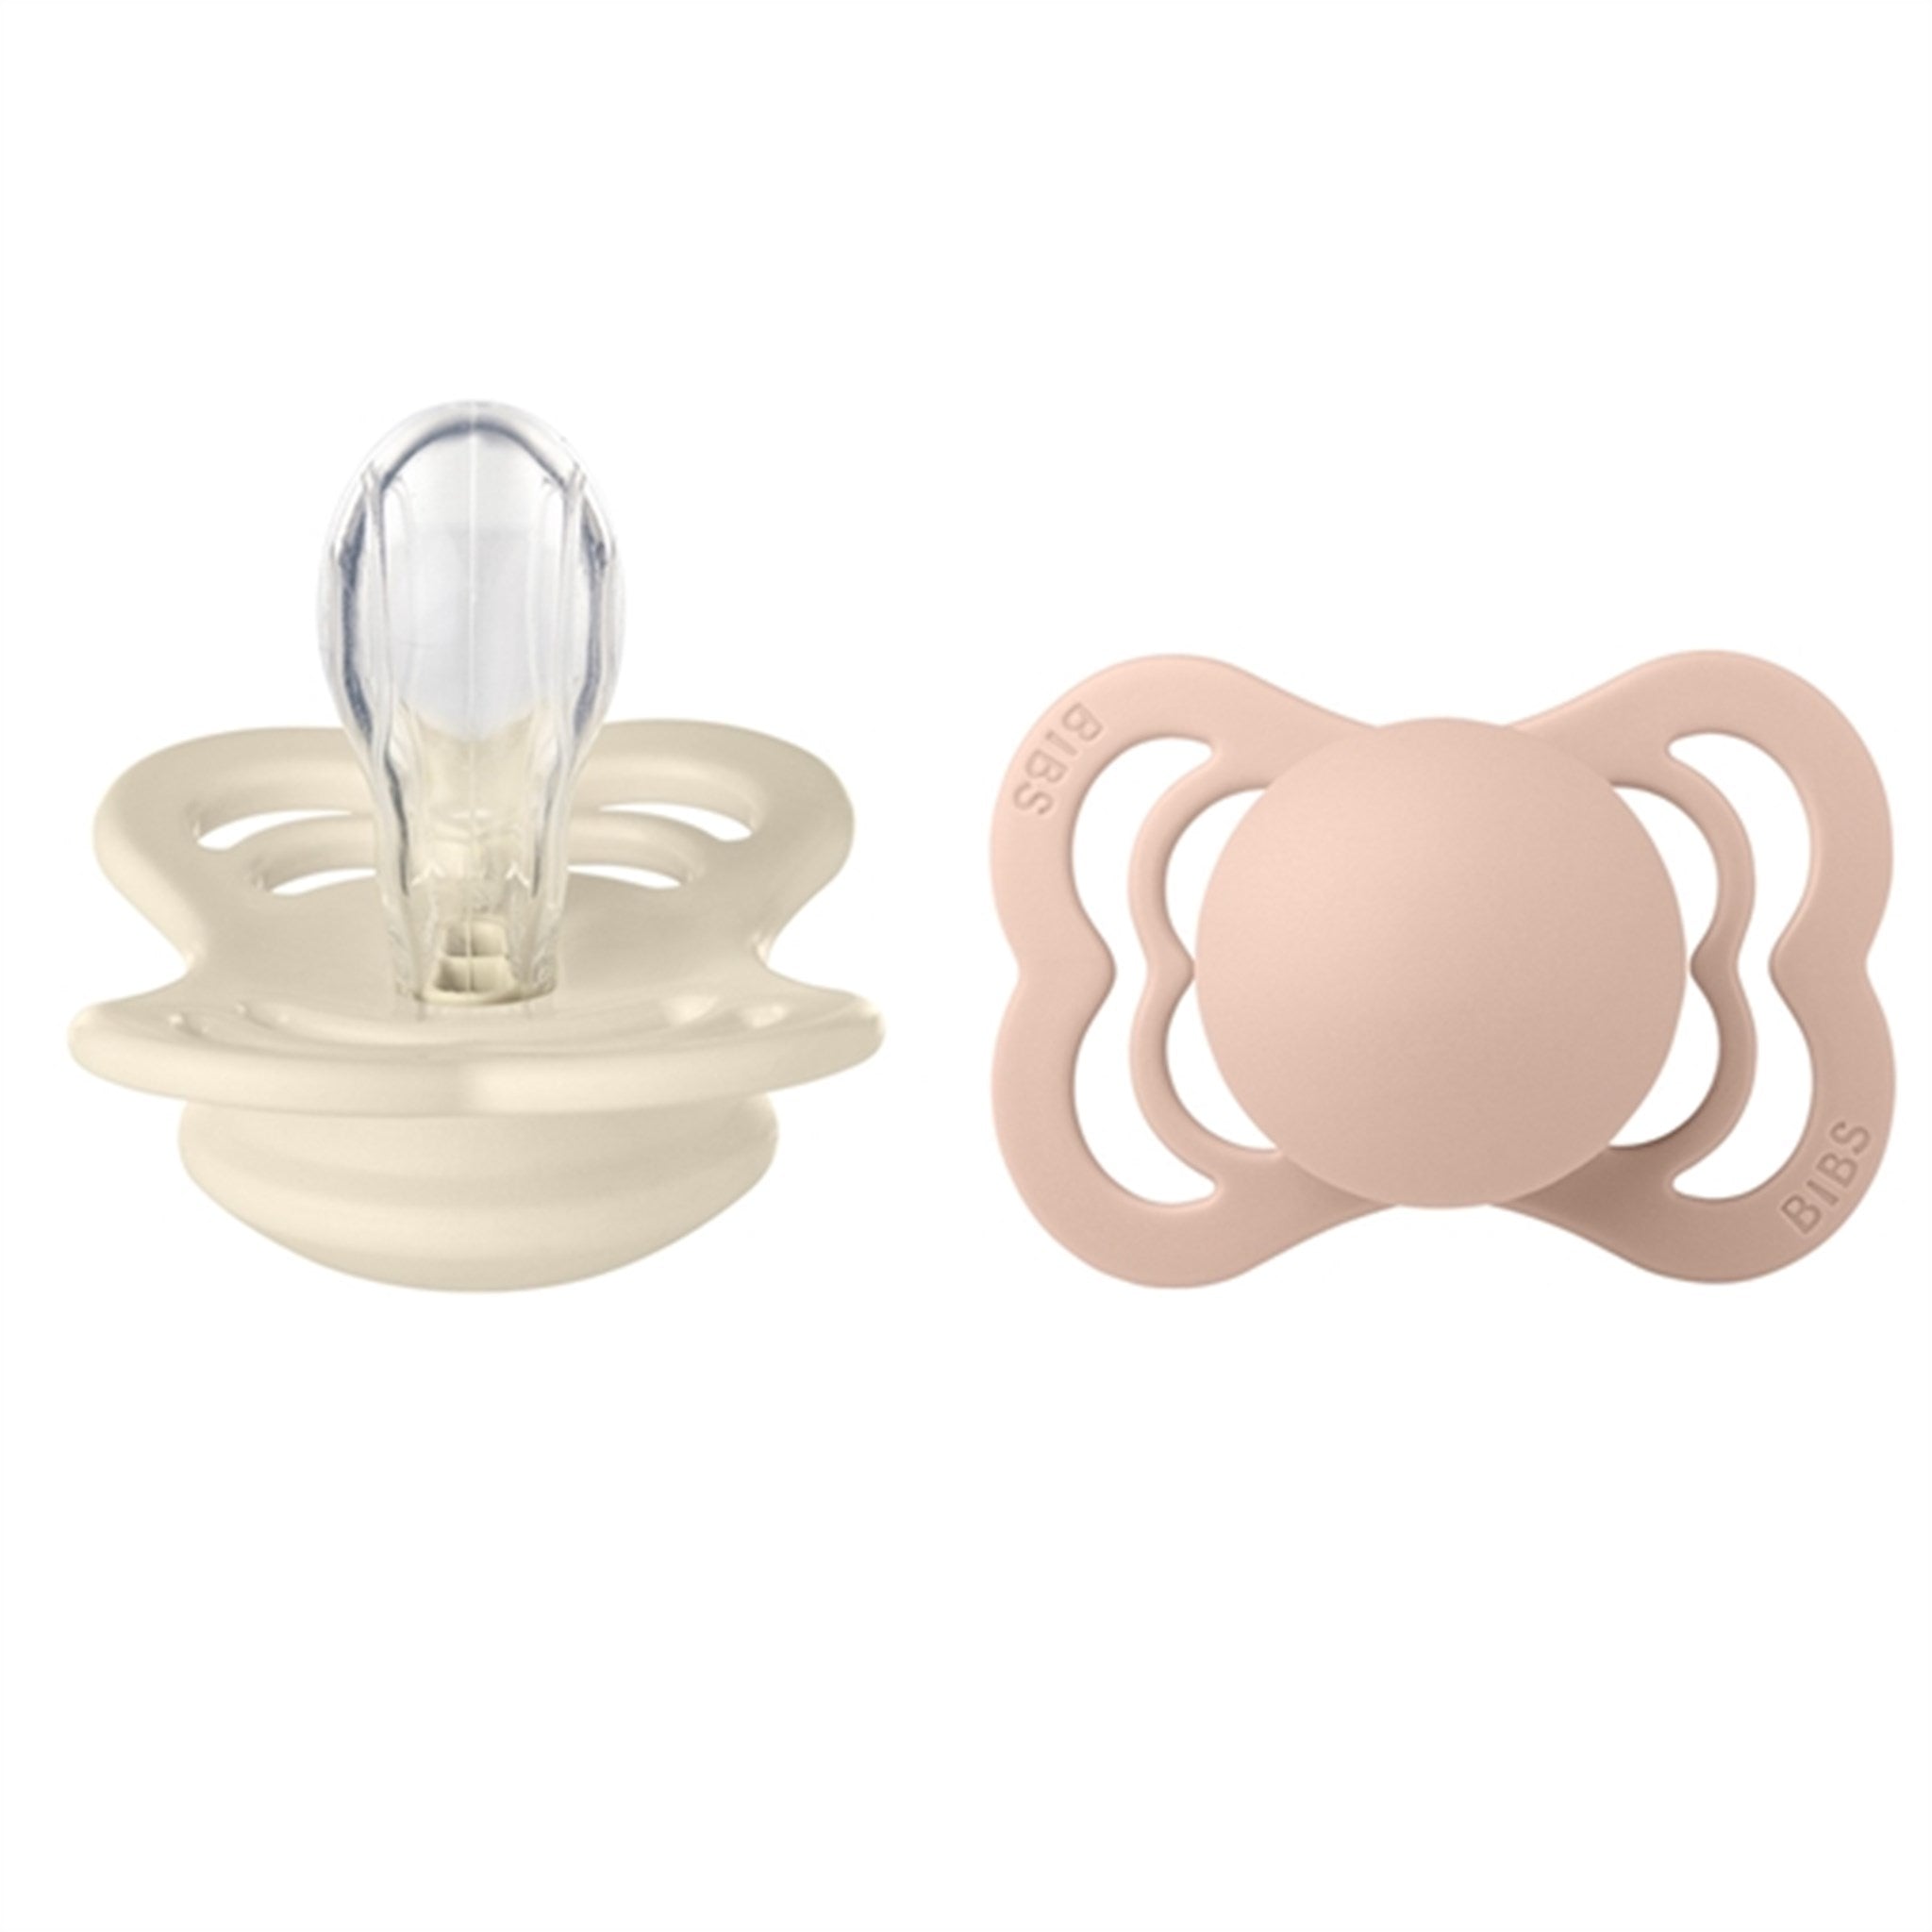 Bibs Supreme Silicone Pacifier 2-pack Symmetrical Ivory/Blush